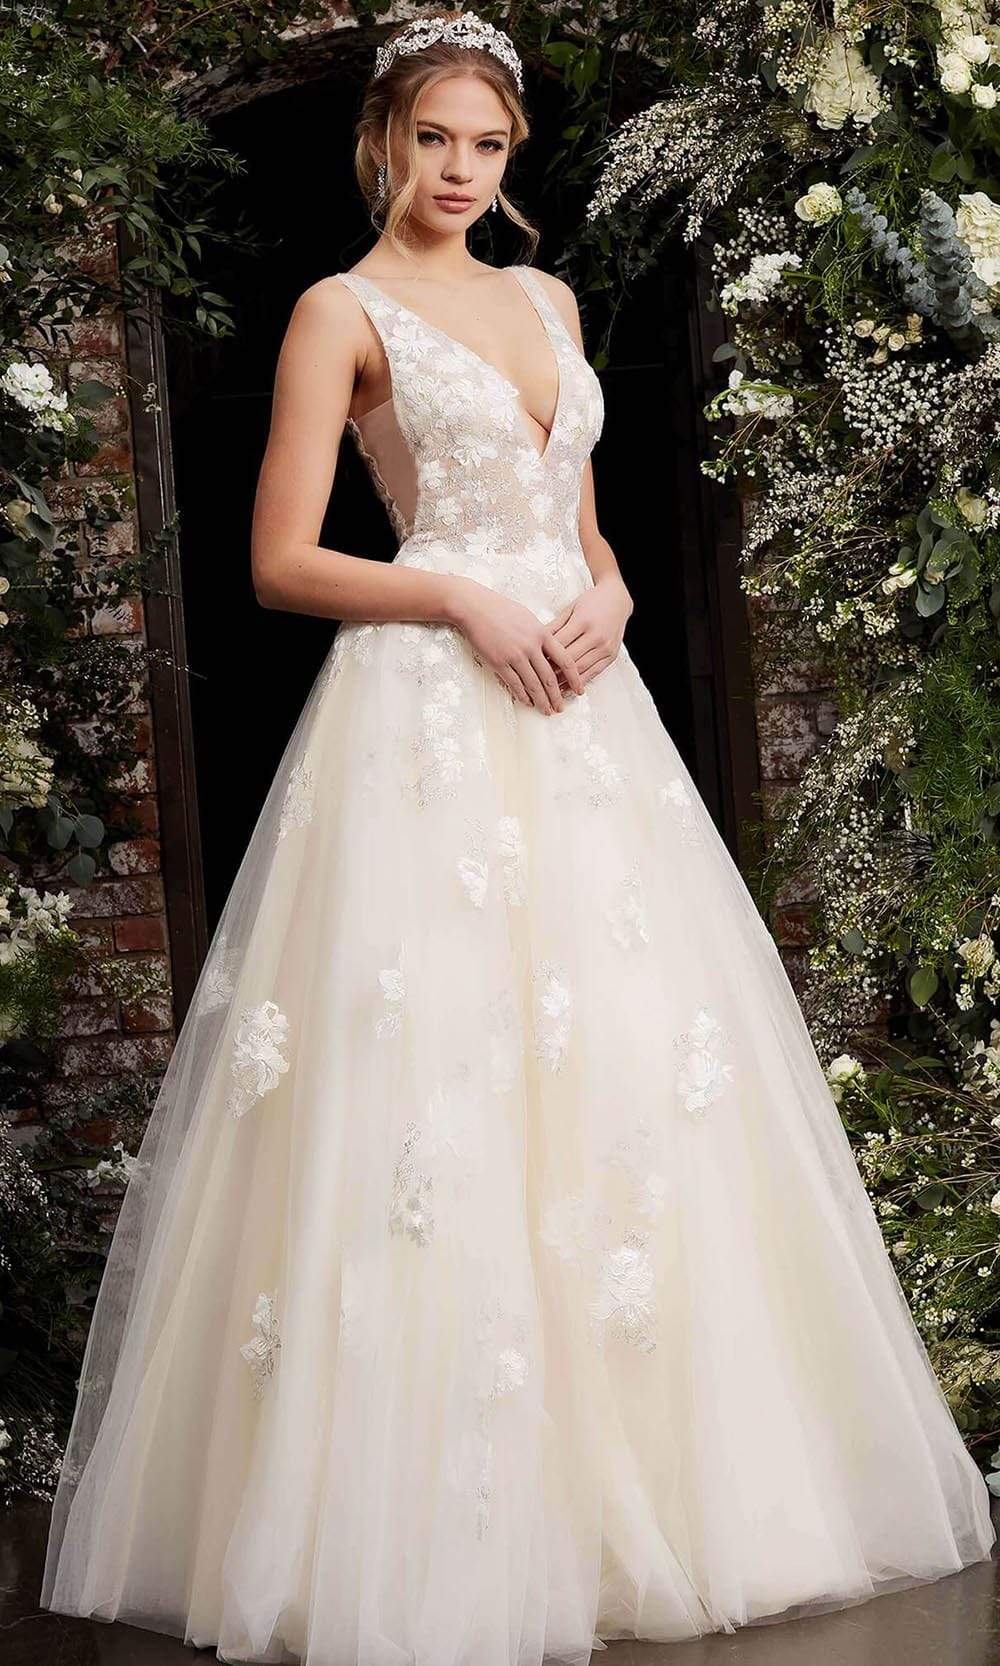 Sheer Floral Applique A-Line Tulle Wedding Dress - Ever-Pretty US